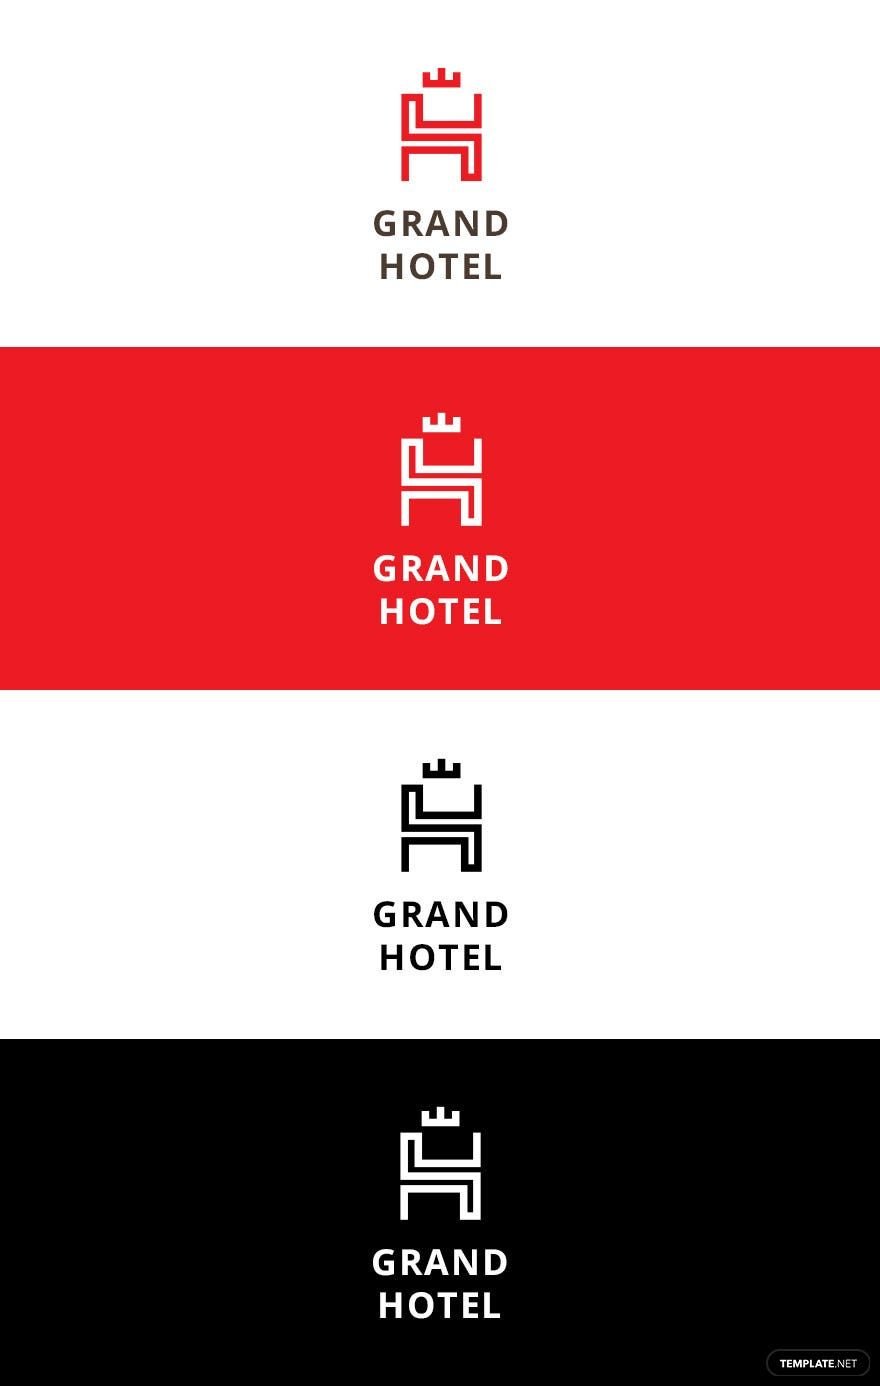 Grand Hotel Logo Template in Word, Illustrator, PSD, Apple Pages, Publisher, InDesign